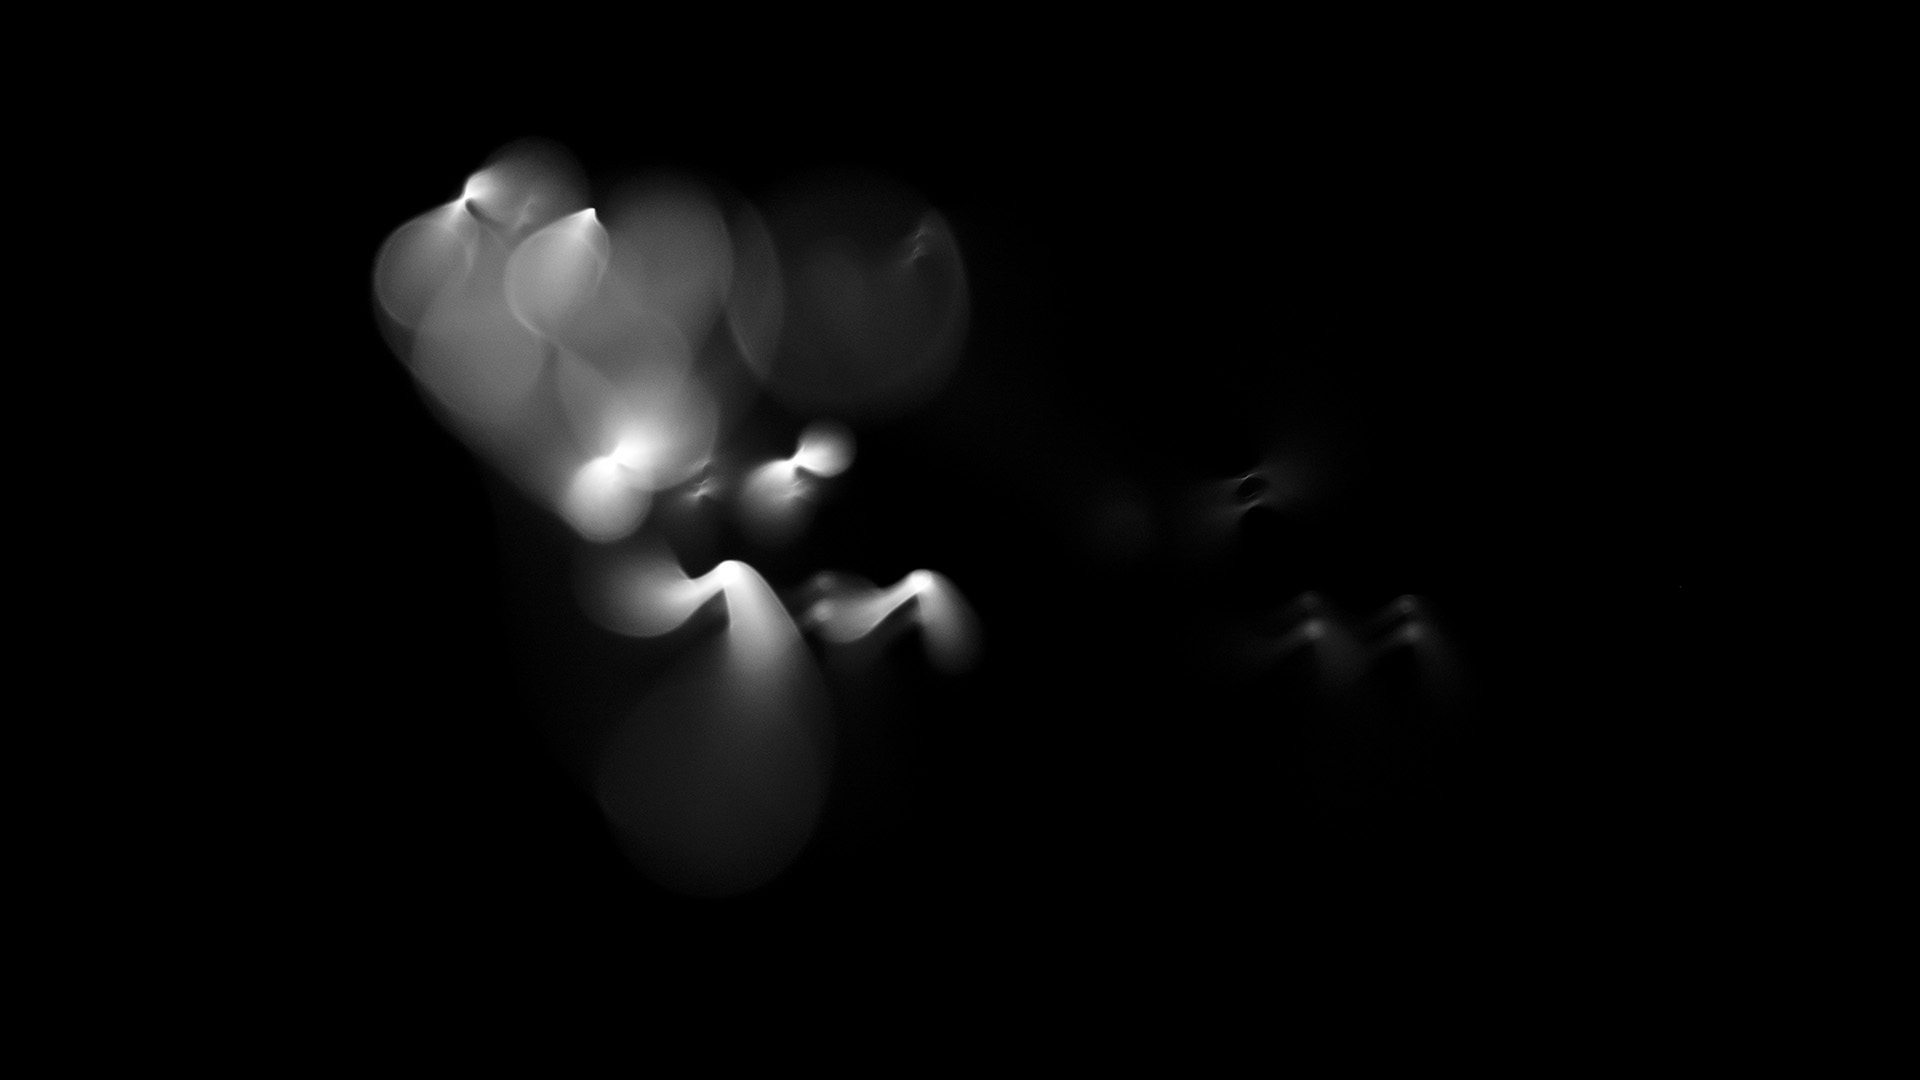 Metamorph, a photograph of a light blob for a science fiction short story by Karthikeyan KC.